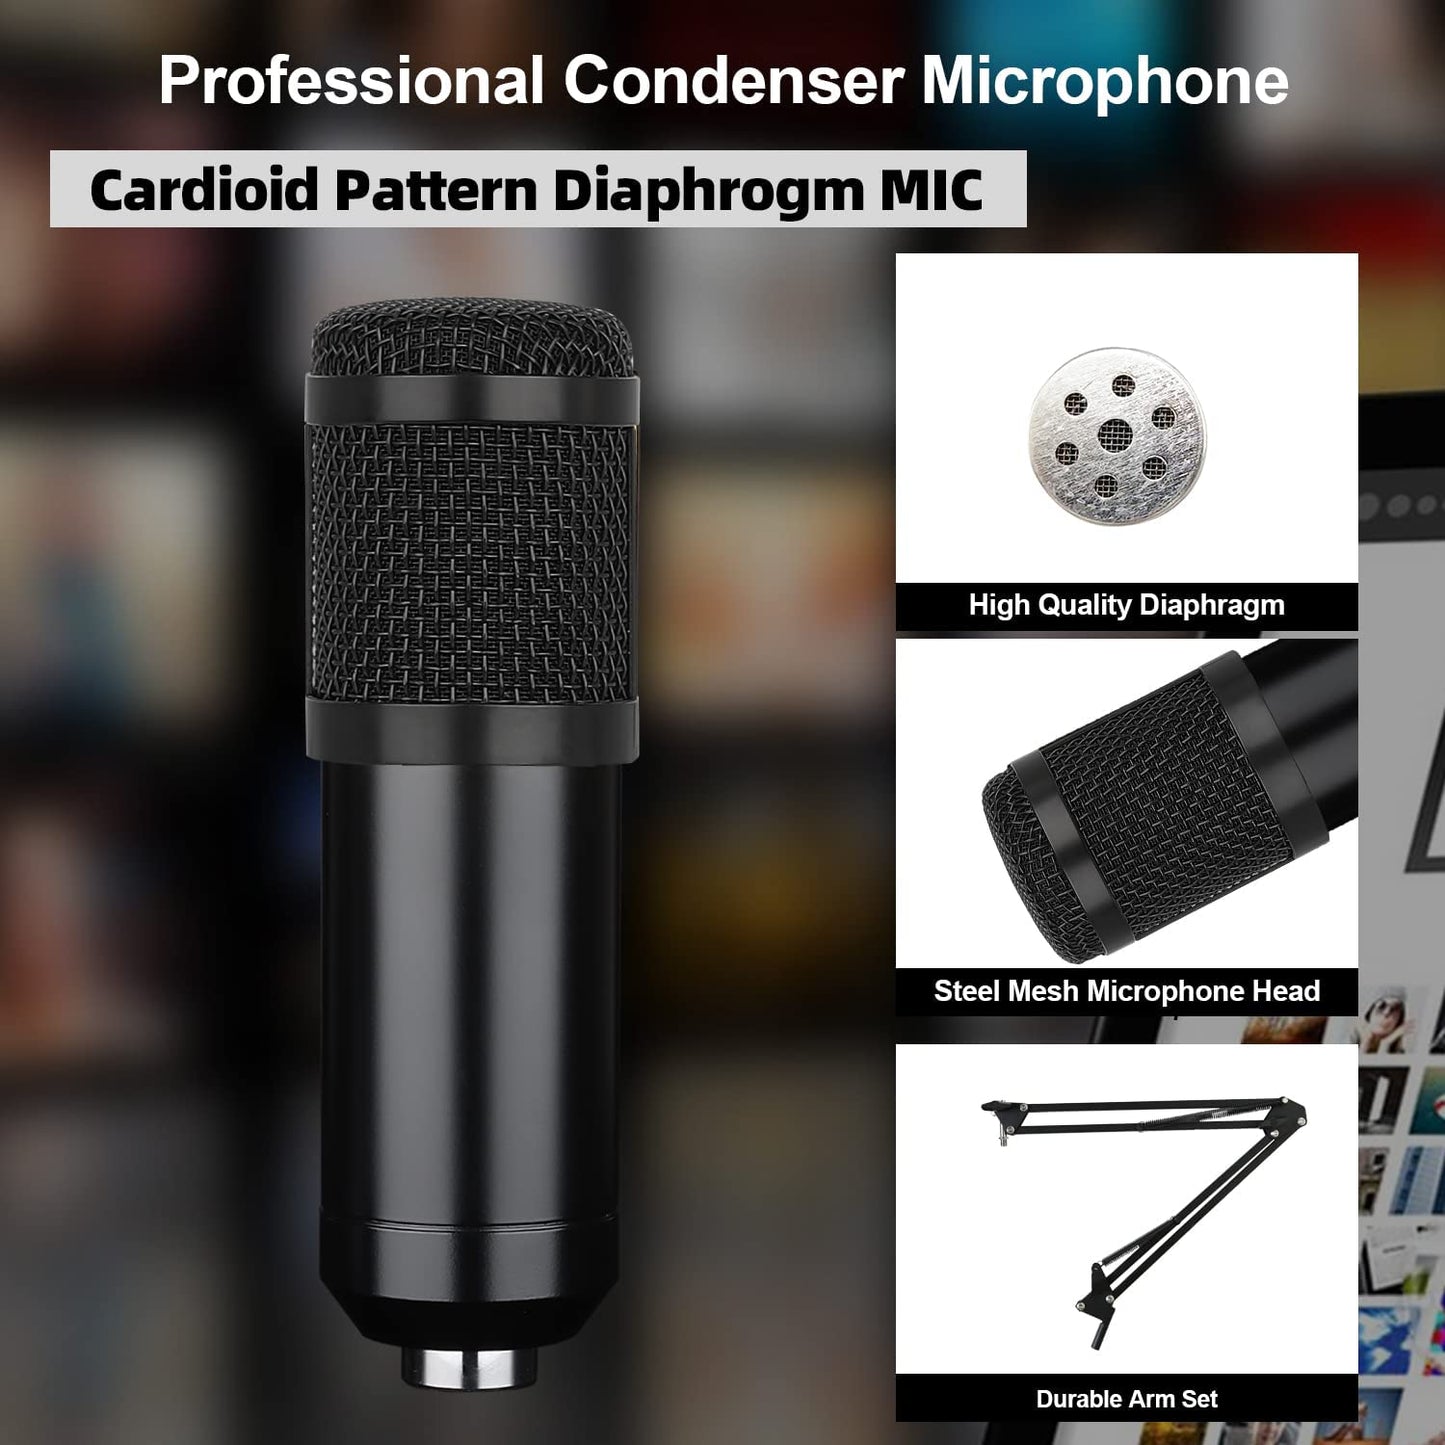 Guarda GD100 Studio Condenser USB Microphone Kit: Elevate Your PC Recording, Podcasting, Karaoke, and Streaming!